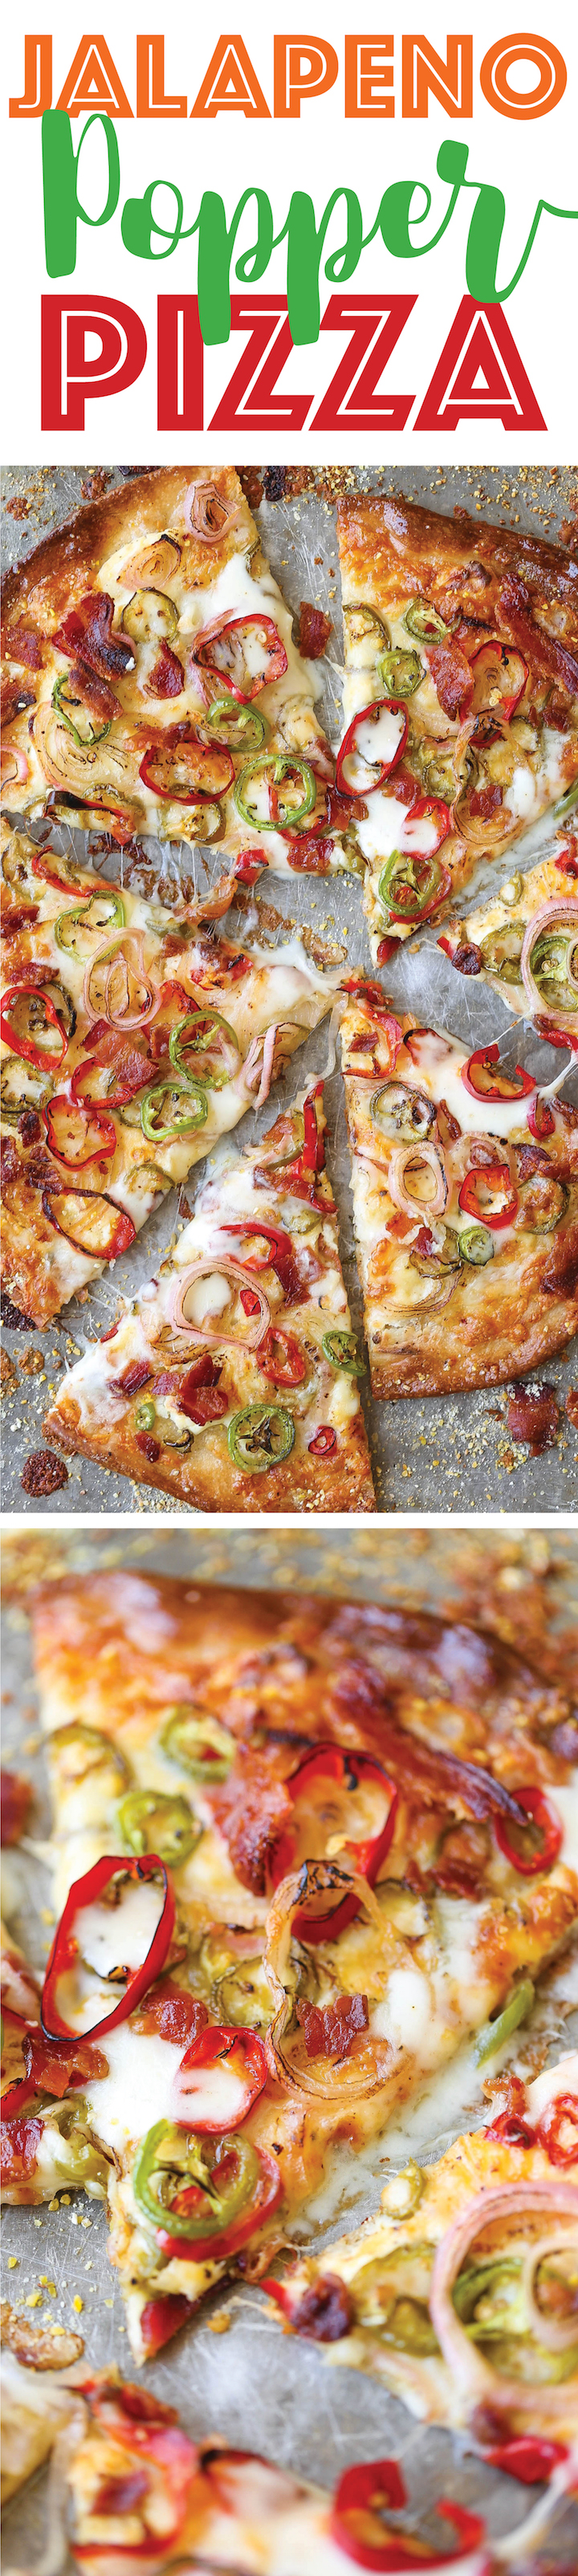 Jalapeño Popper Pizza - All the flavors of a cheesy jalapeño popper is so much better in pizza form, with added bacon of course!